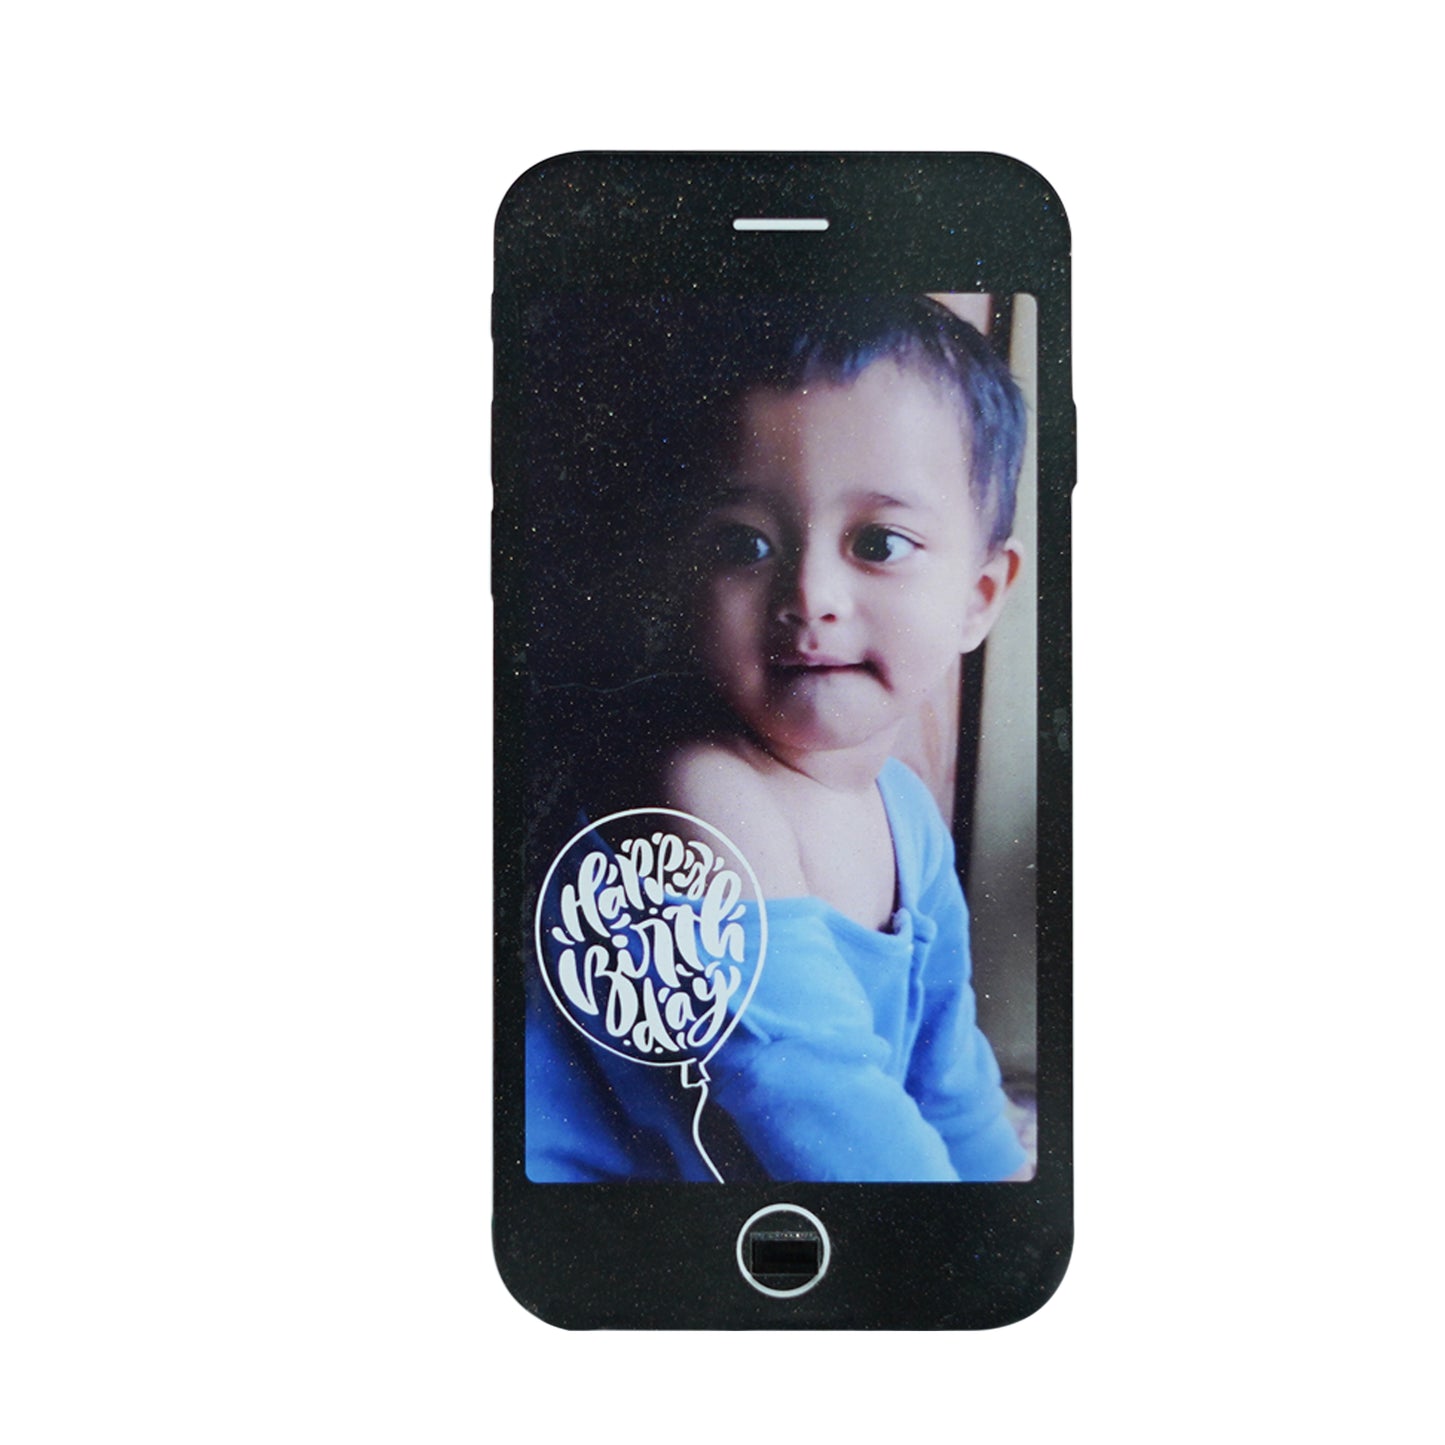 Personalised Mobile Photo gift for kids